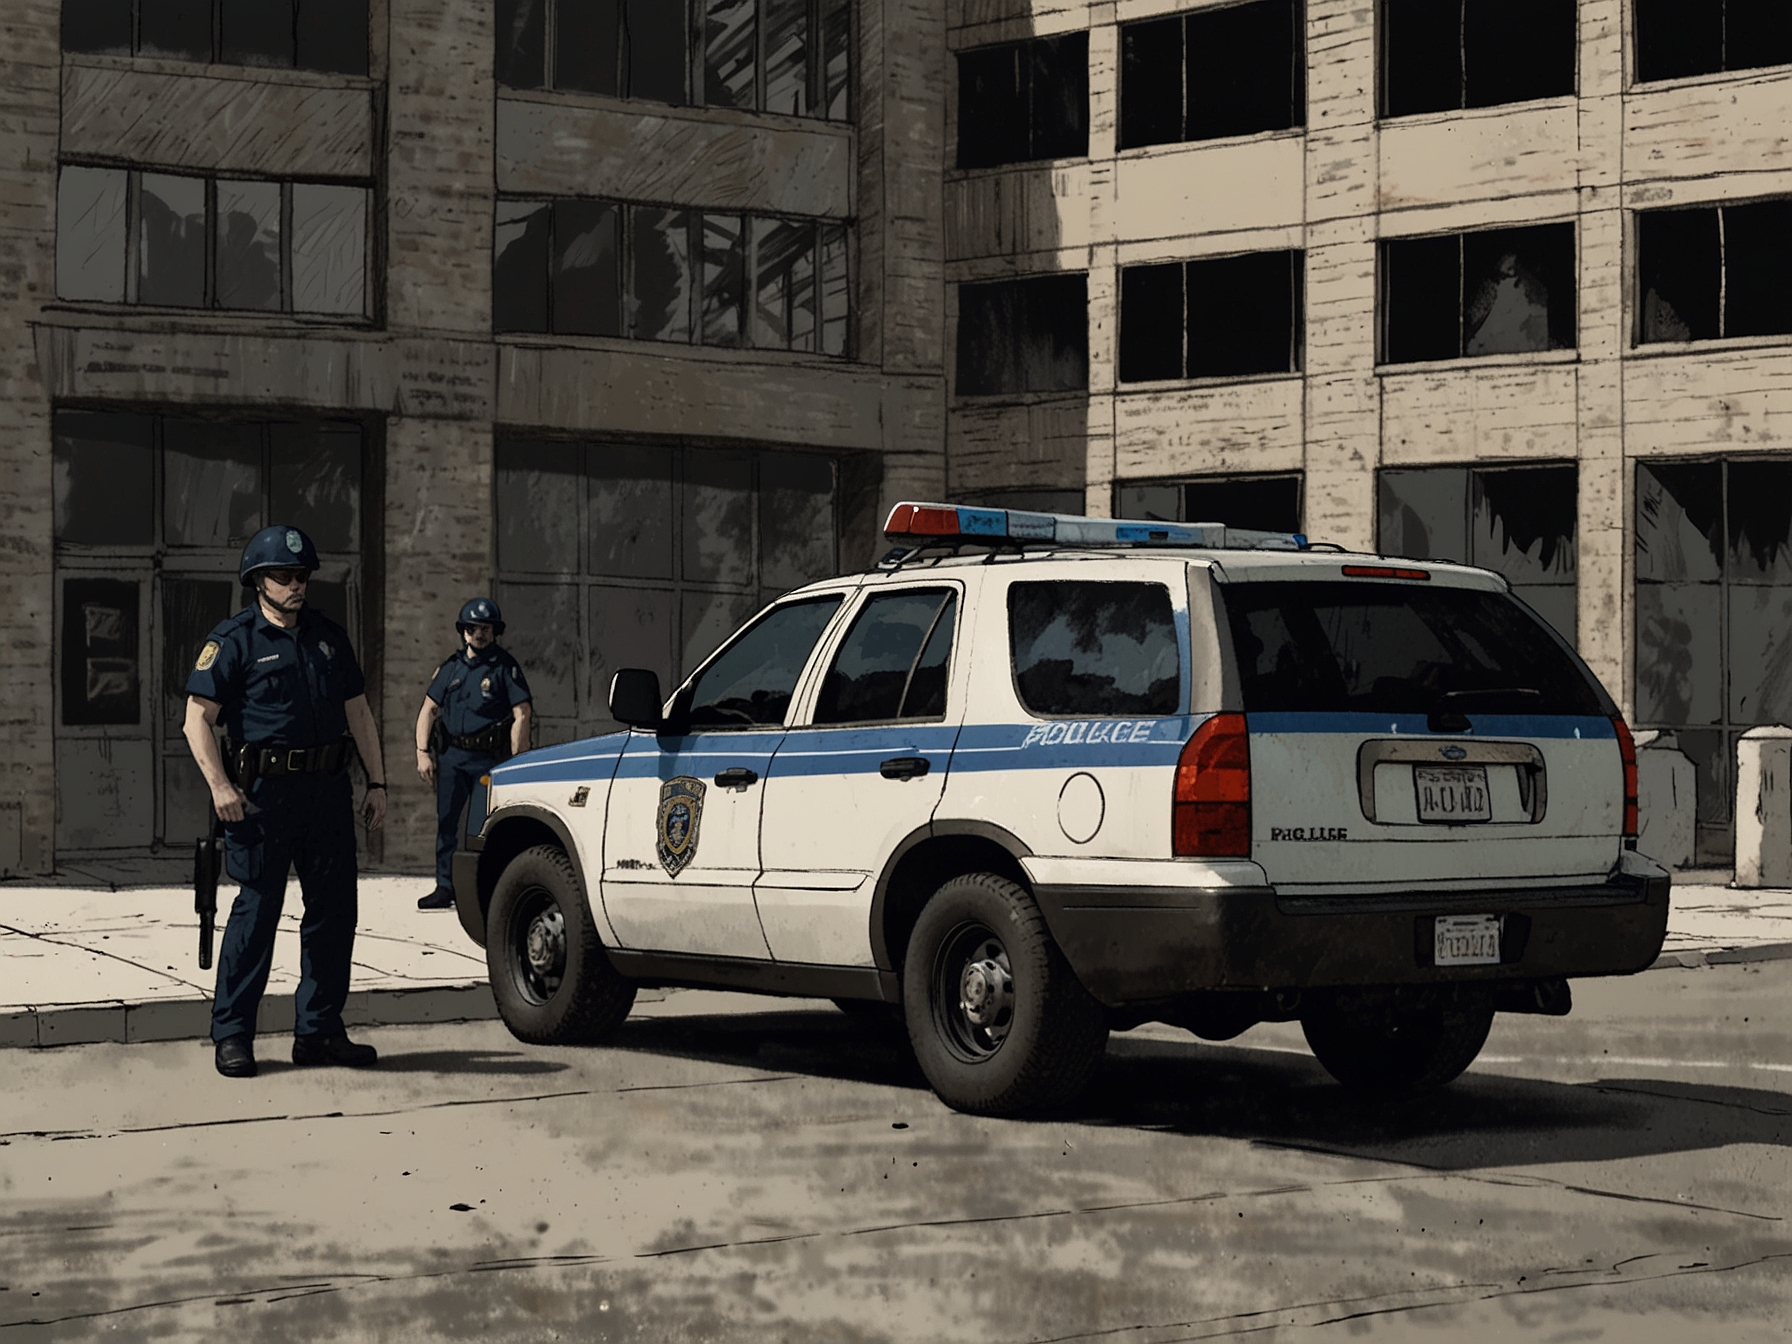 A police vehicle parked outside the headquarters, with officers inspecting the area where the security breach occurred. This image highlights the tension and awareness during the incident.